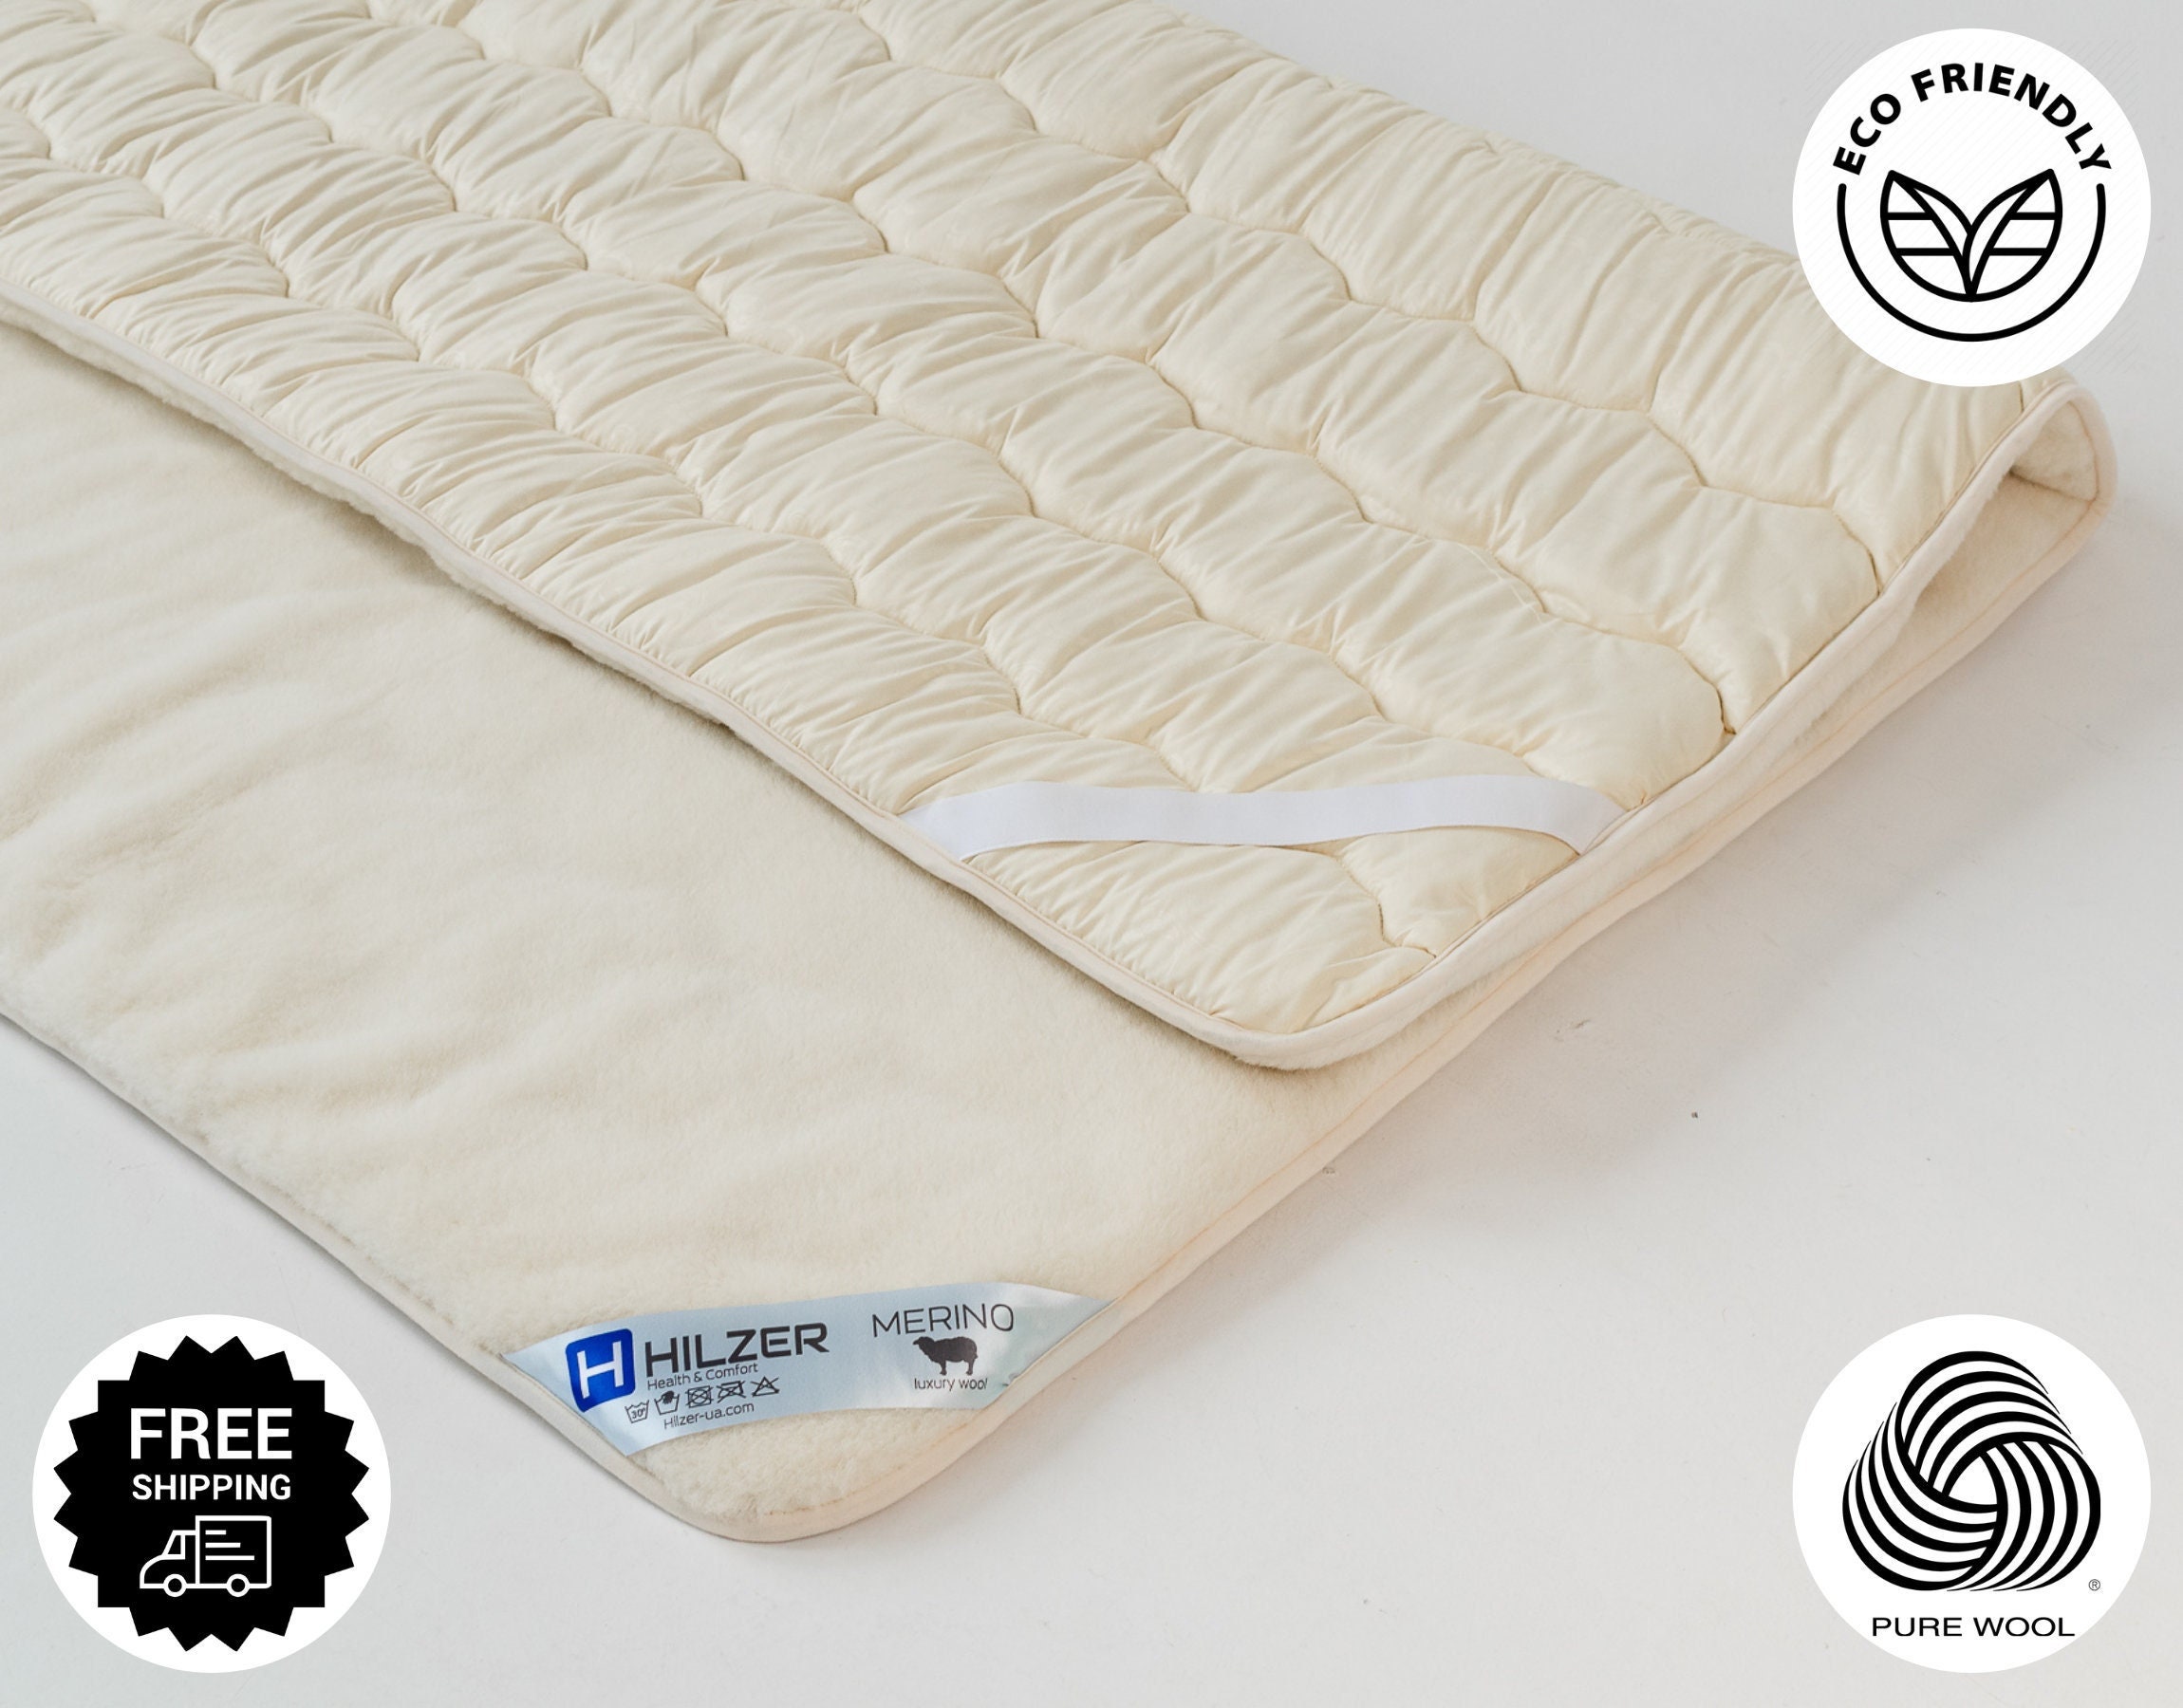 Pad, Toppers, and Protectors— Washable Wool Mattress Topper, 1.5